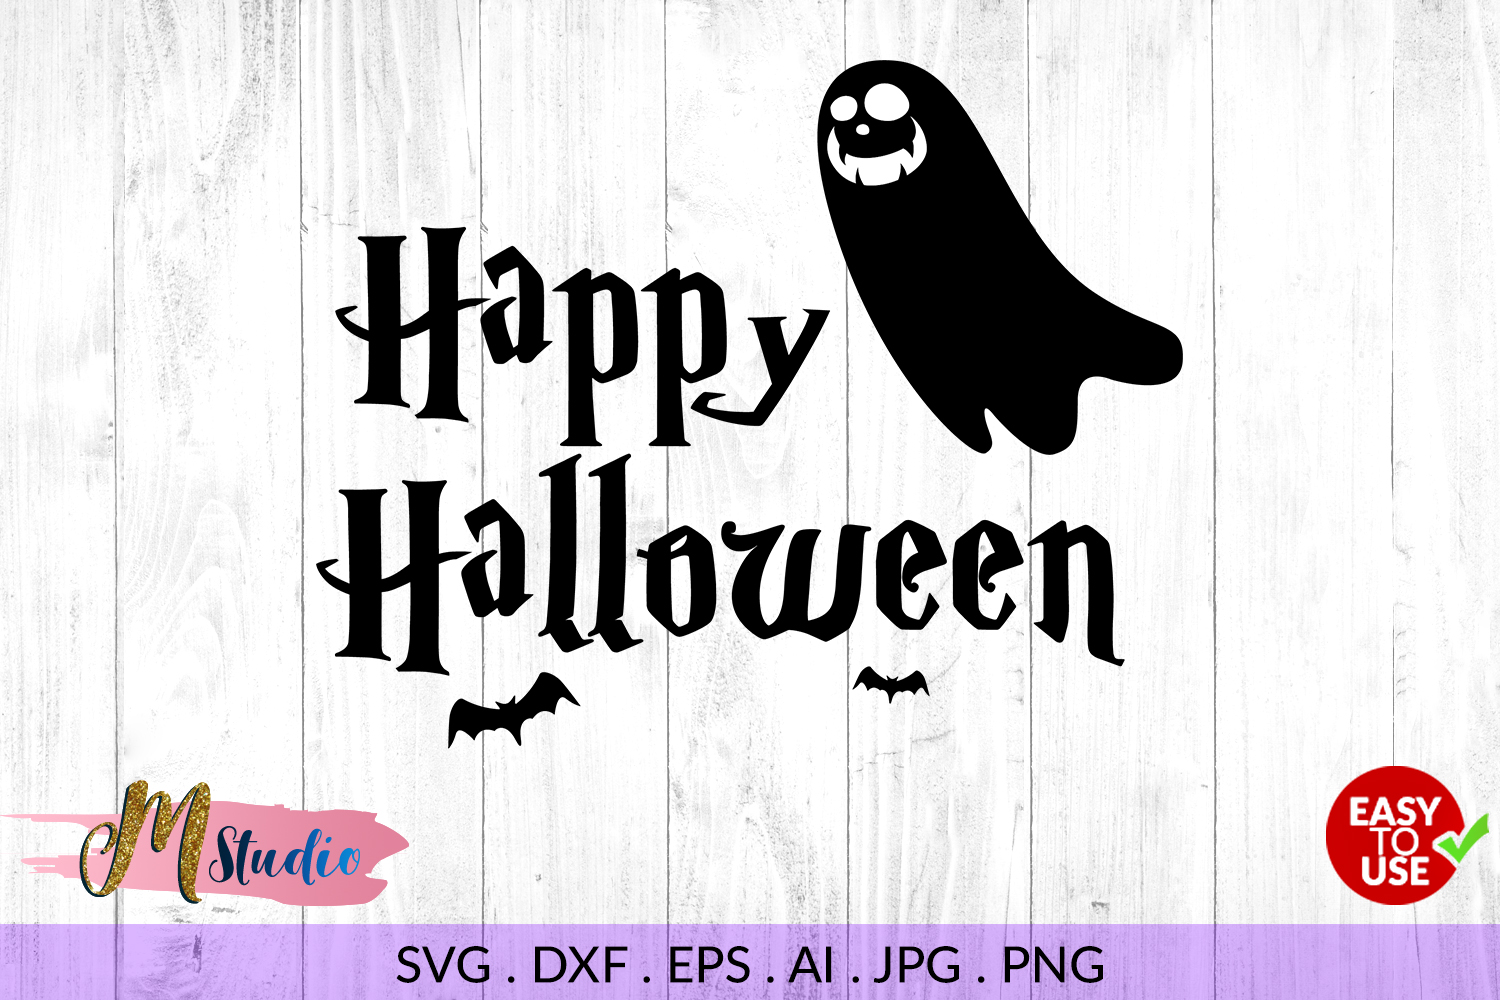 Happy halloween svg, for Silhouette Cameo or Cricut